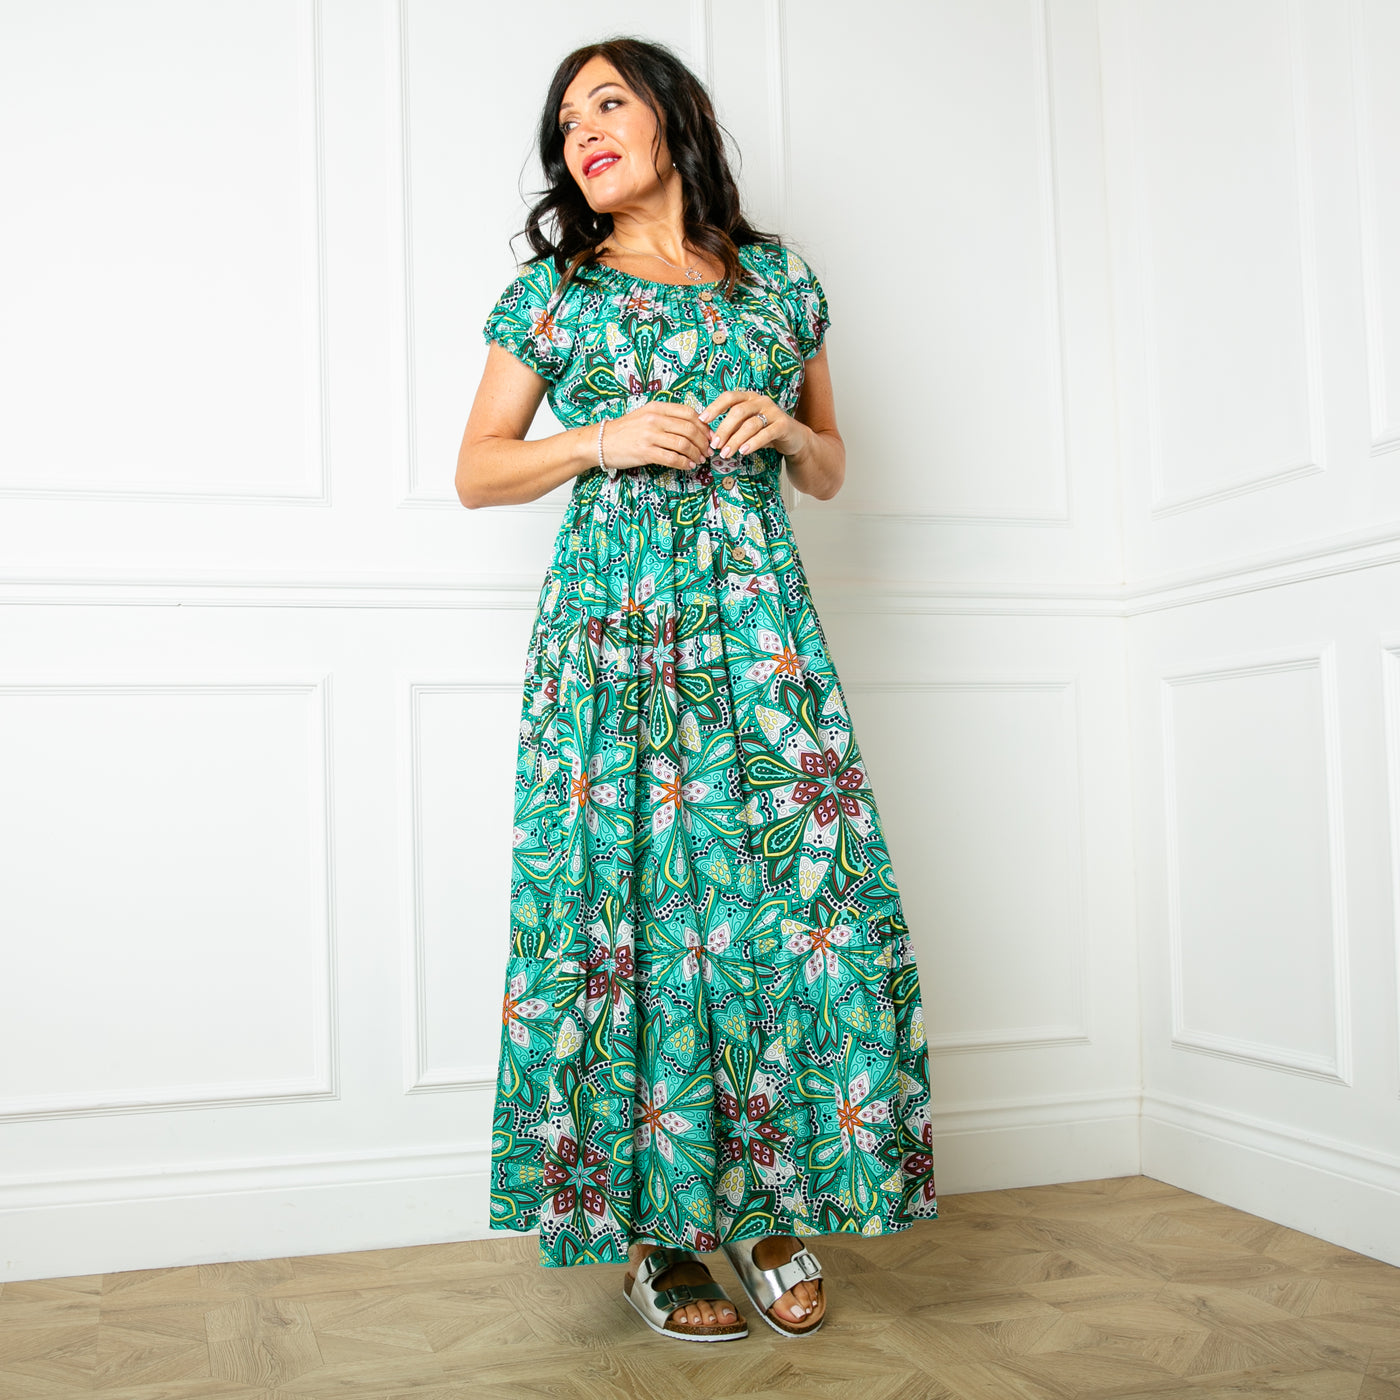 The green Printed Button Maxi Dress with a shirred elasticted waistband and button detailing down the front